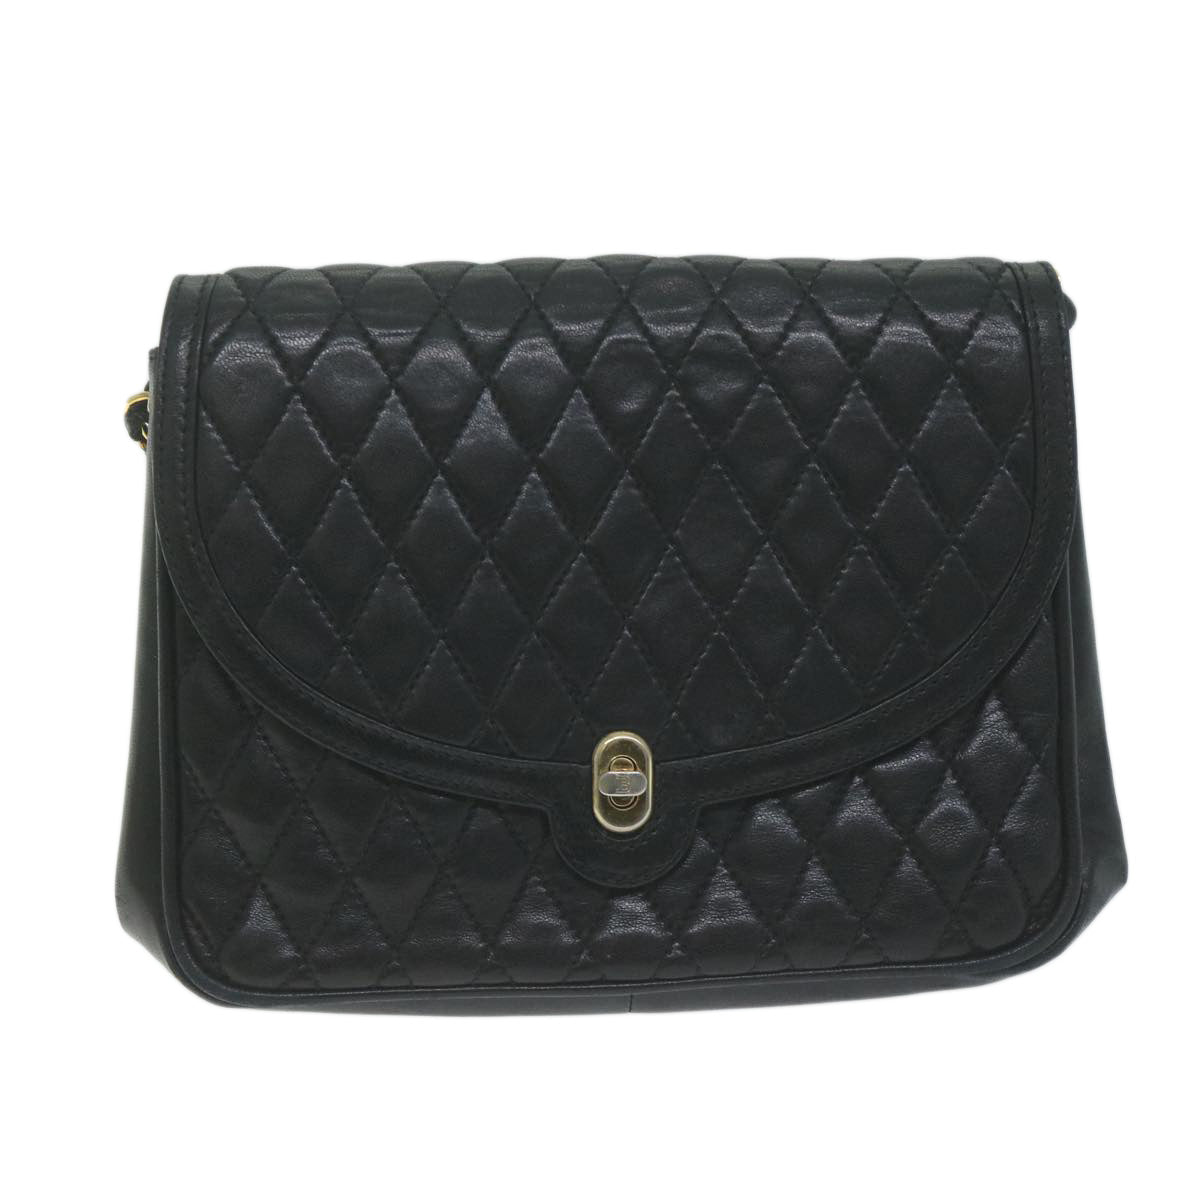 BALLY Quilted Chain Shoulder Bag Leather Black Auth 66071 - 0